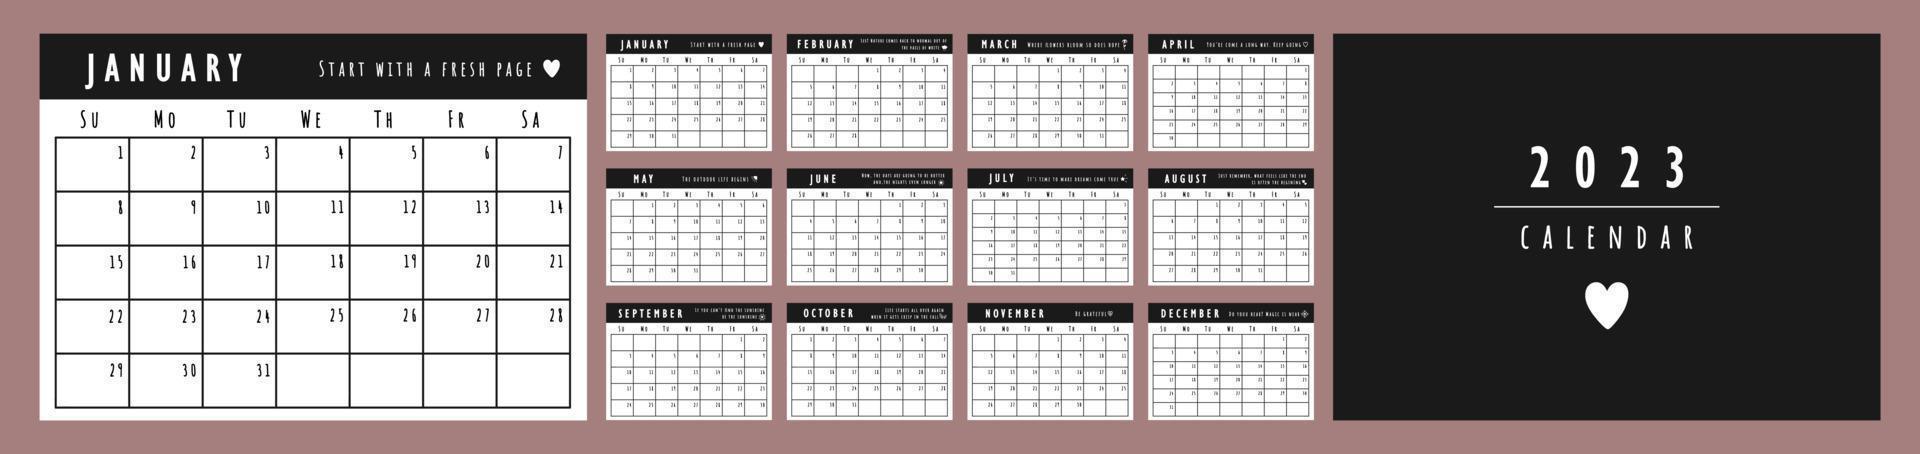 2023 Calendar planner template with quotes. The week starts on Sunday. Black wall or desk calendar. Set of 12 months vector